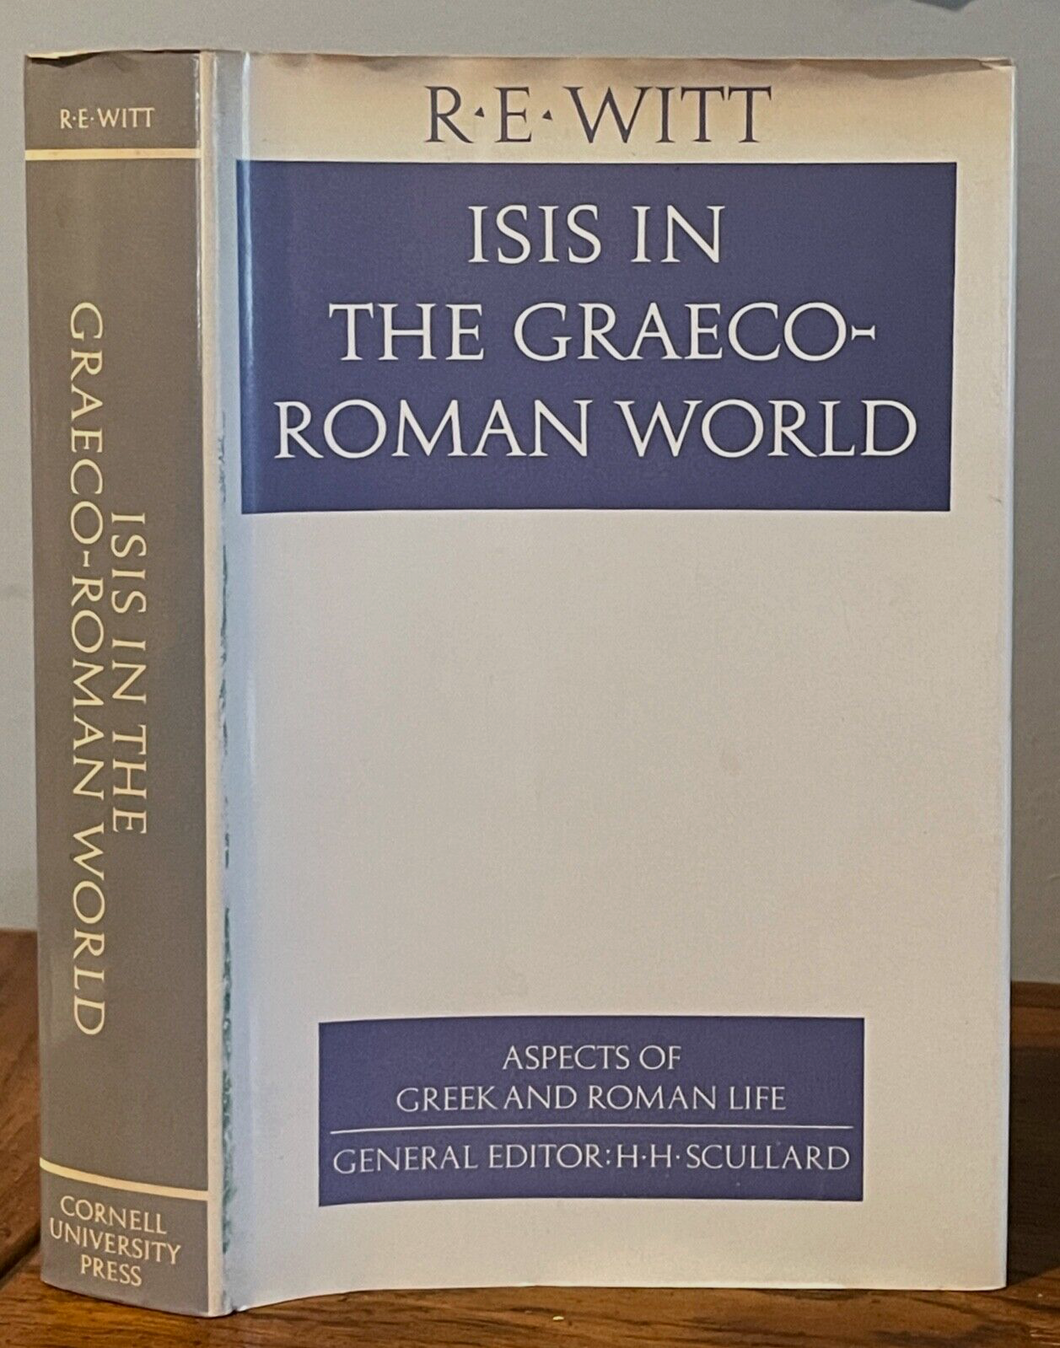 ISIS IN THE GRAECO-ROMAN WORLD - Witt, 1st 1971 CULT OF ISIS GODDESS ARCHAEOLOGY